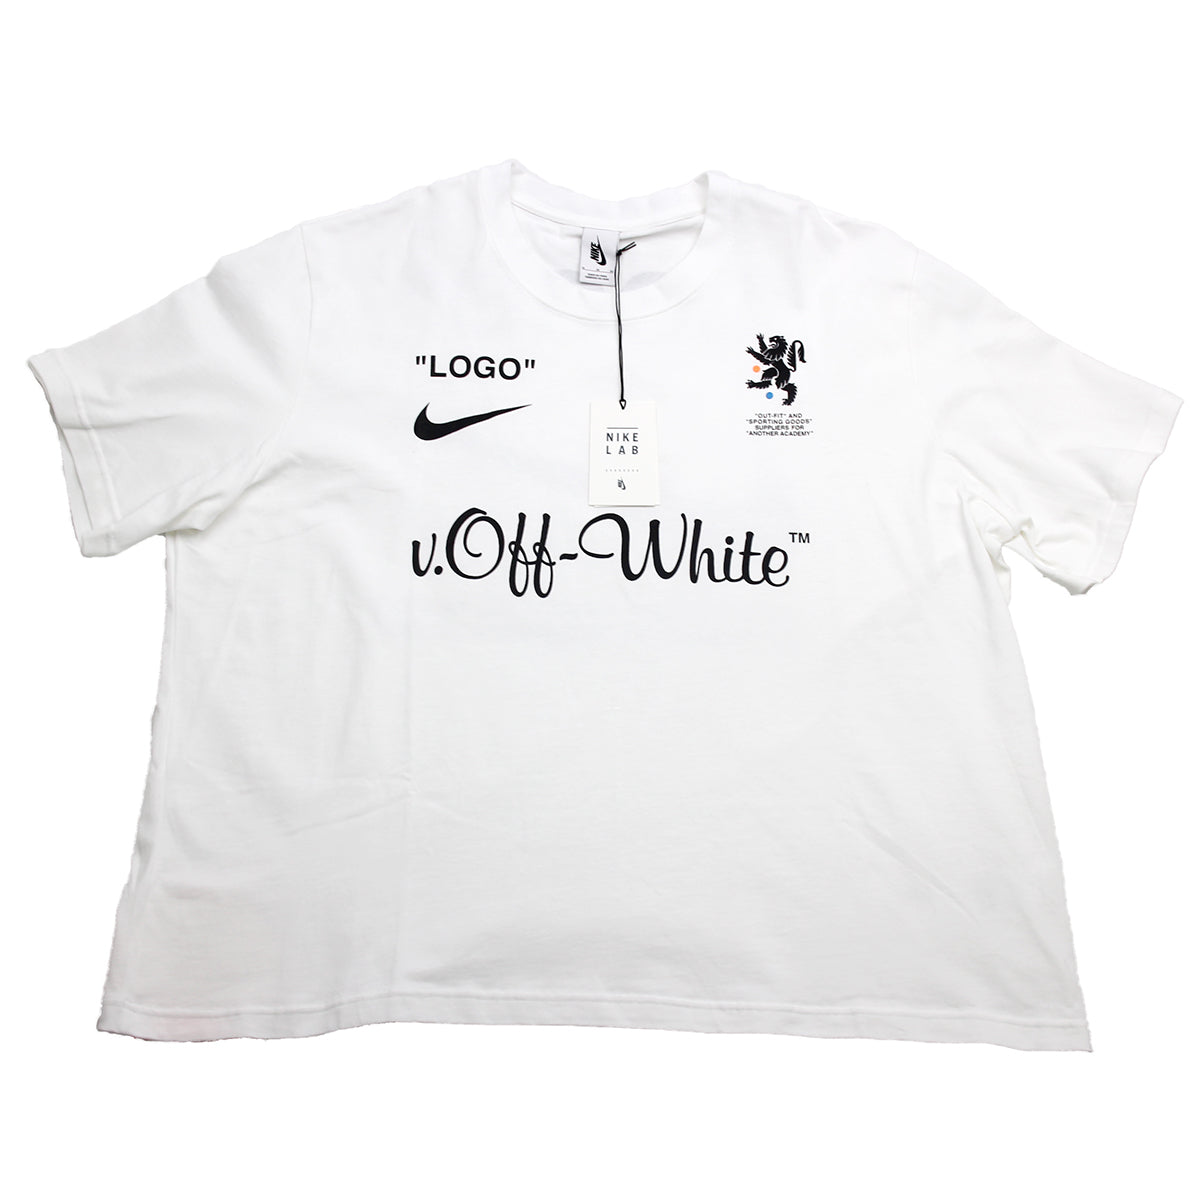 Nike lab ✖️ off-white teeトップス